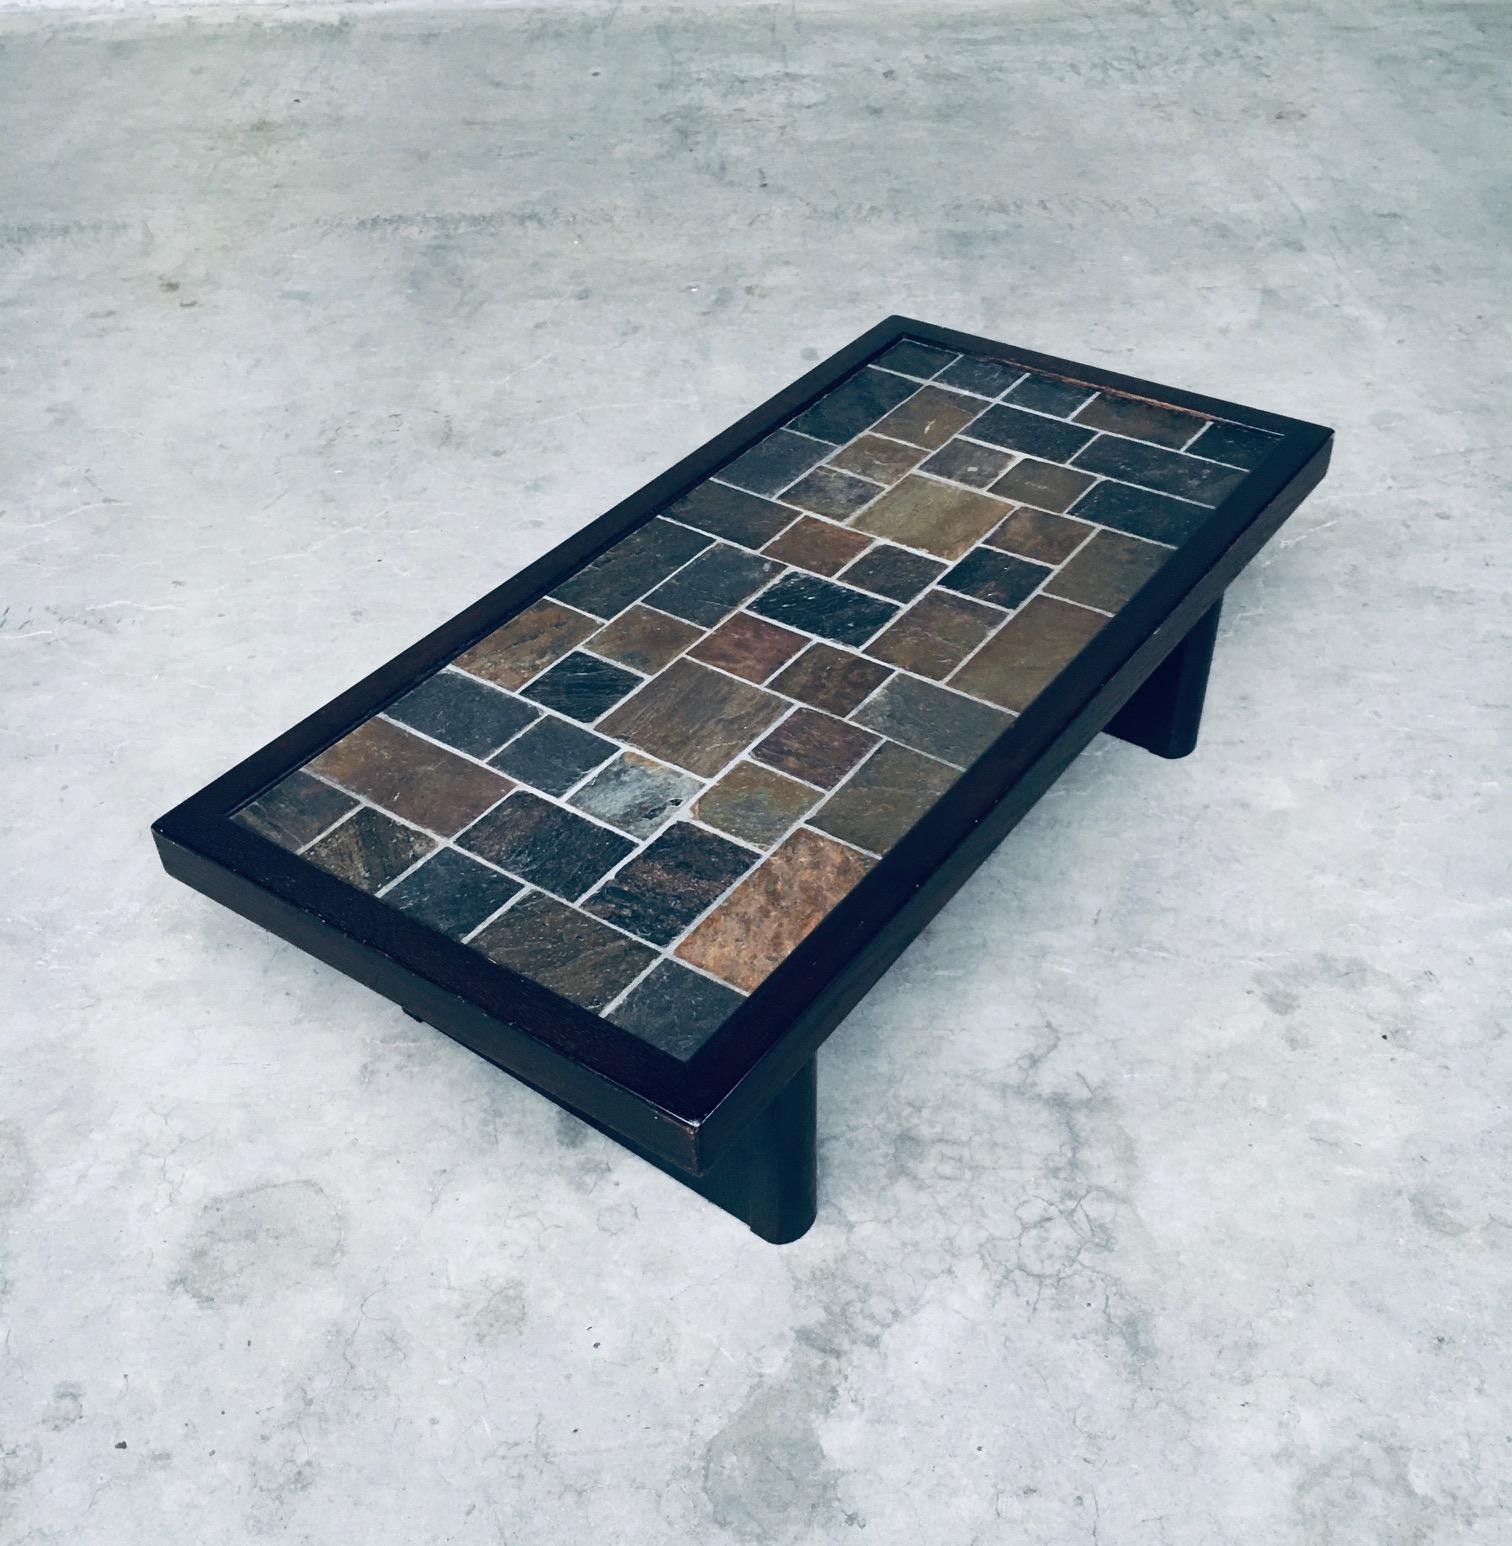 Brutalist Design in Style Slate Tile Inlay Coffee Table, Belgium 1970's For Sale 1